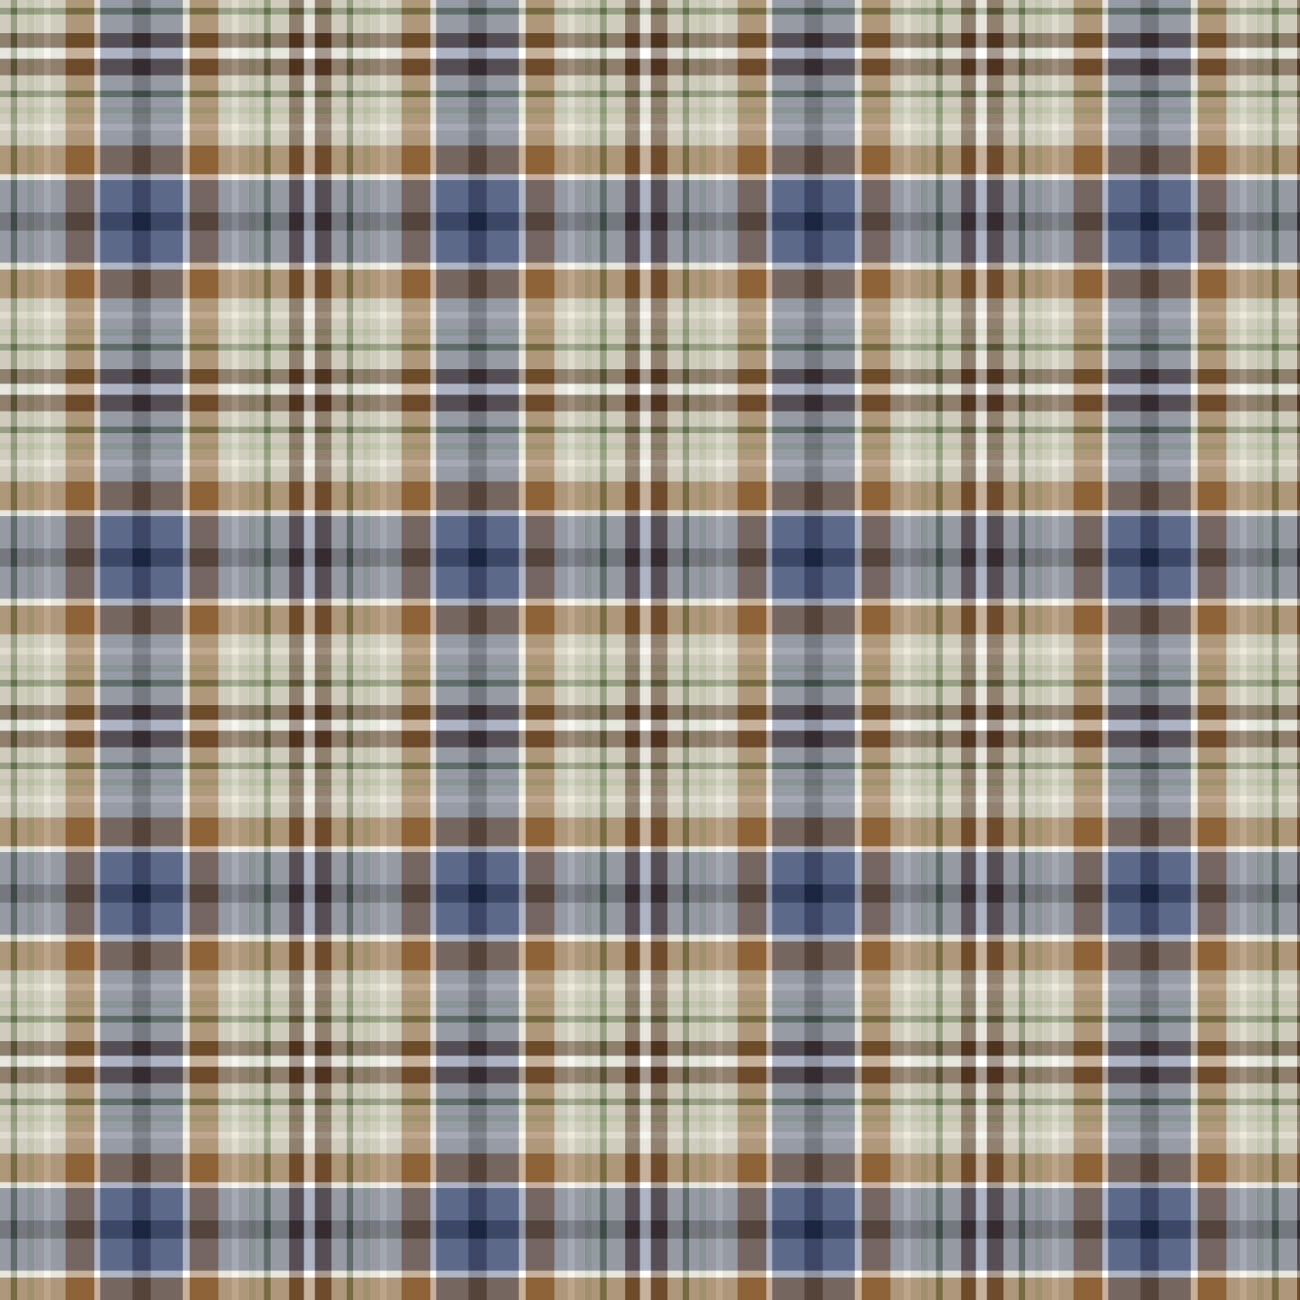 Fall is for Football Collection-Tartan-Multi-100% Cotton 49230704-01